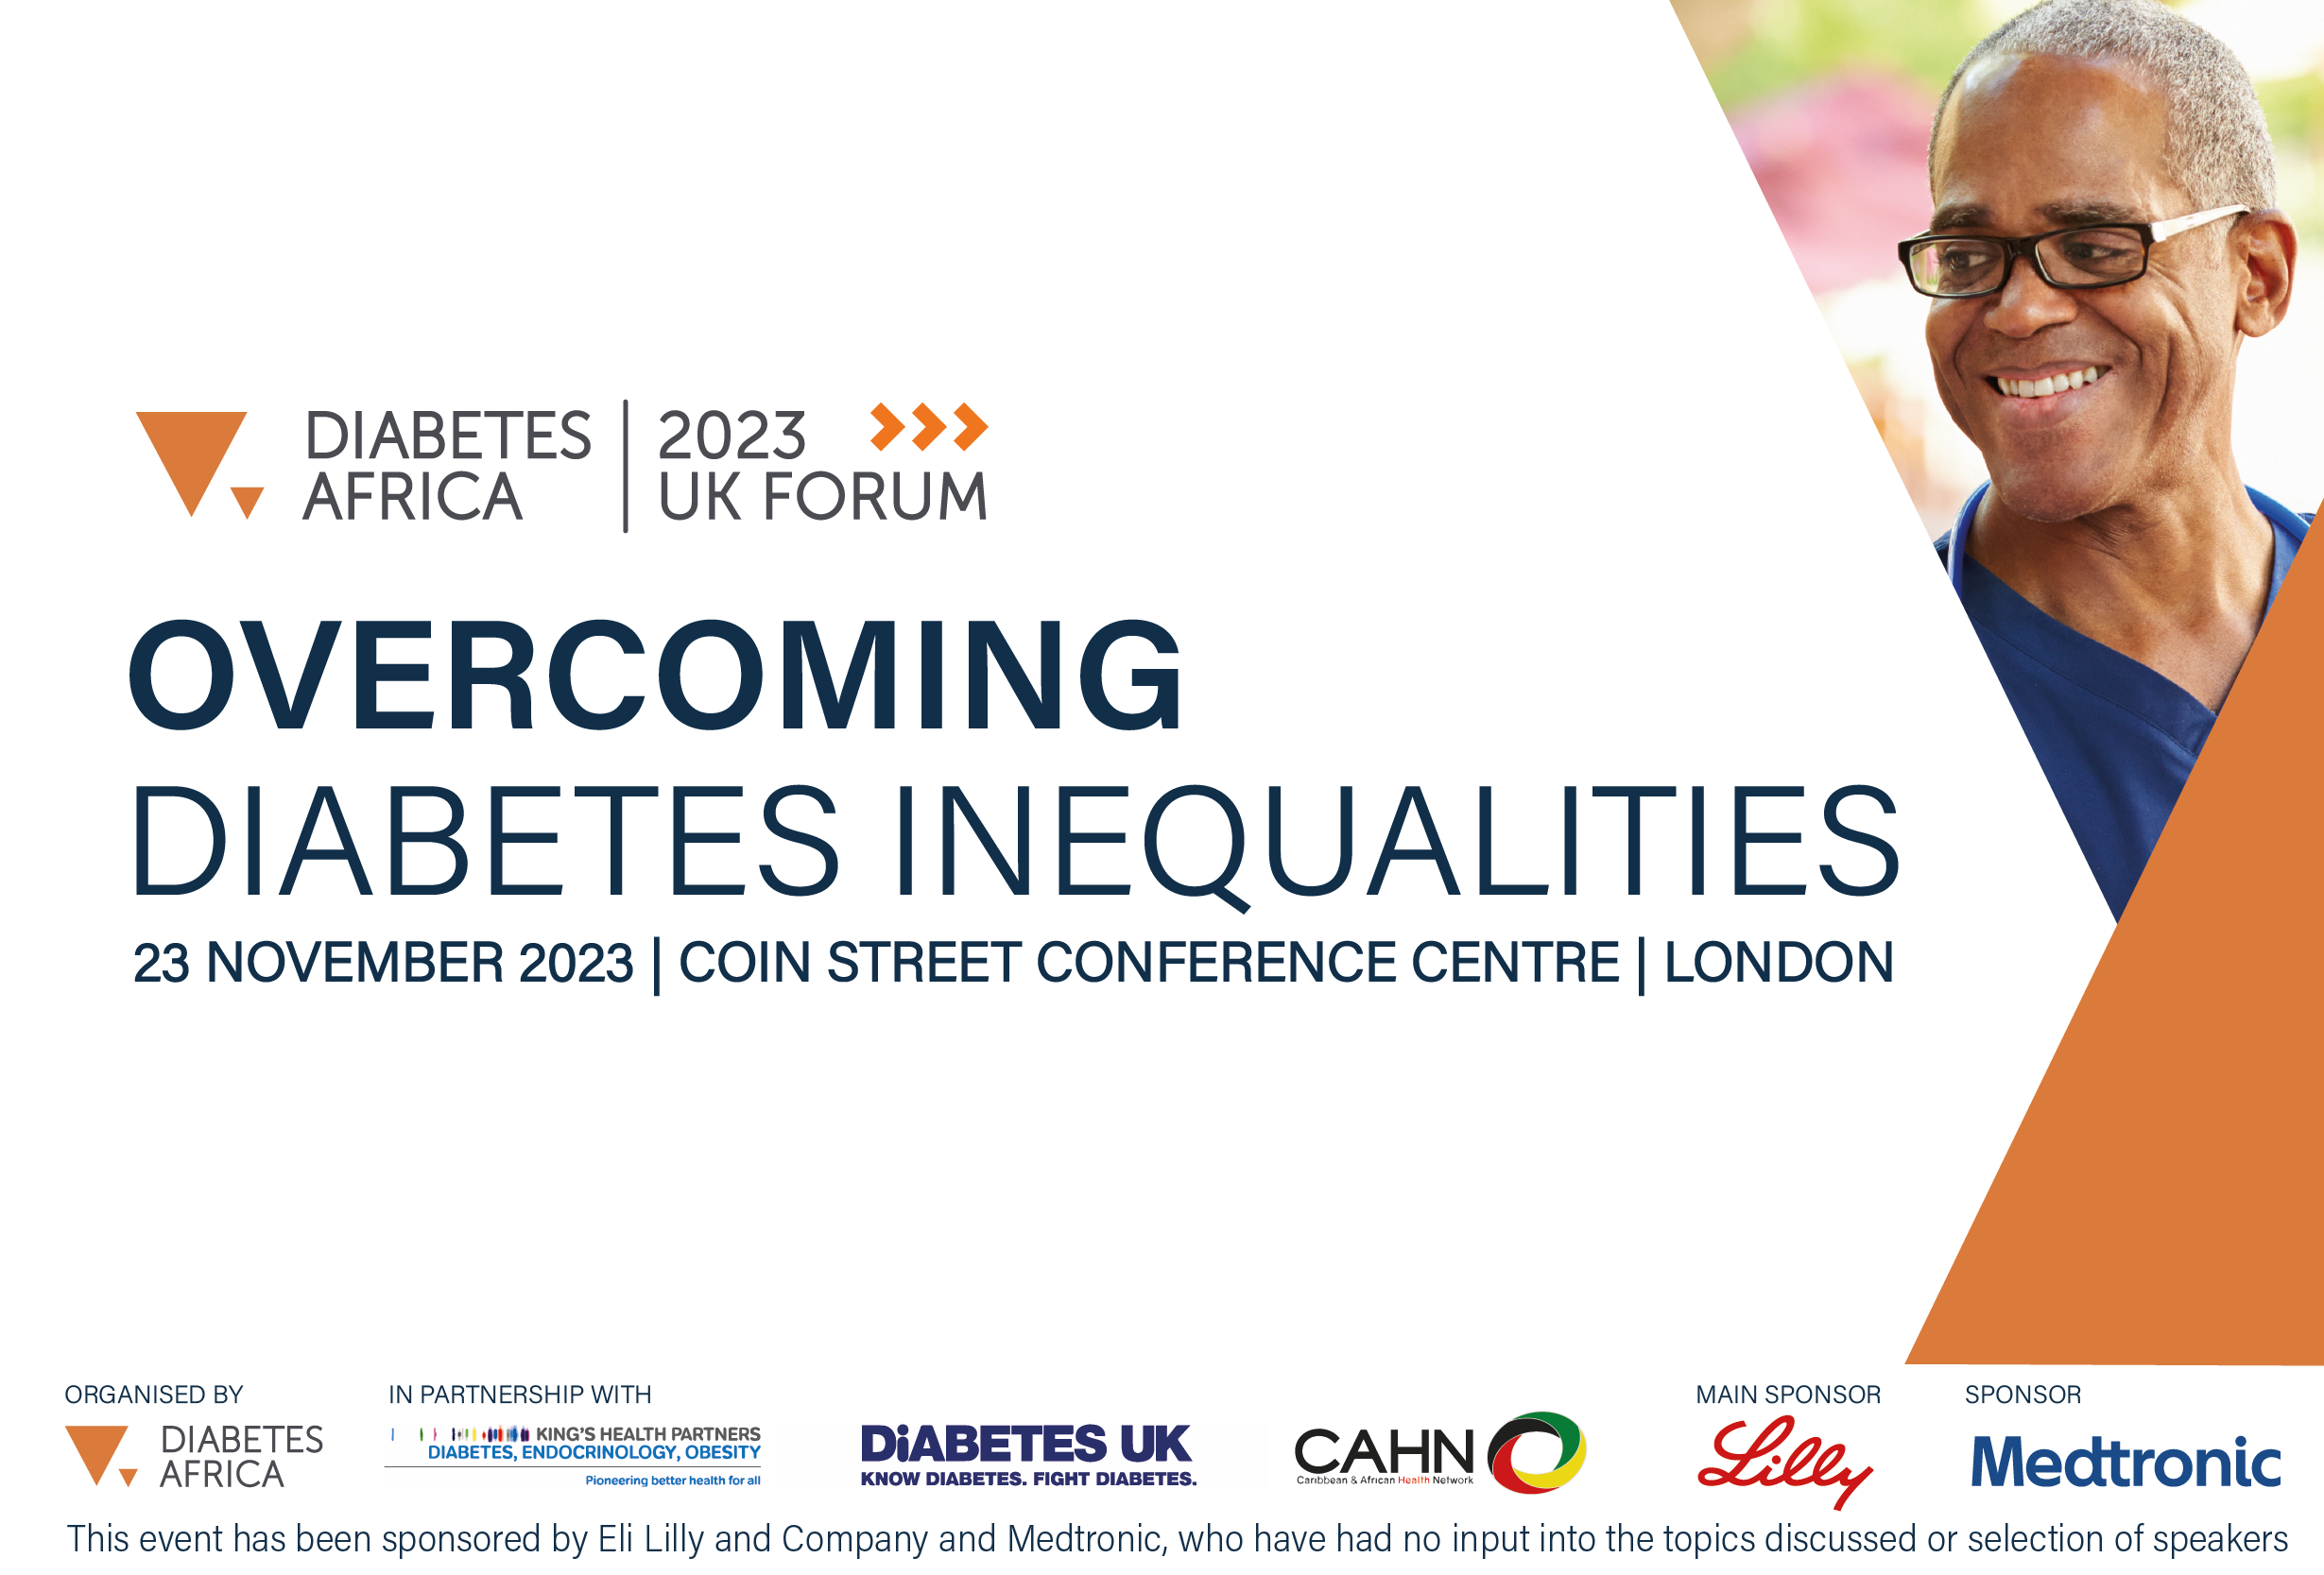 Overcoming Diabetes Inequalities UK forum promotional image. Text reads: 23 November 2023 | Coin Street Conference Centre | London